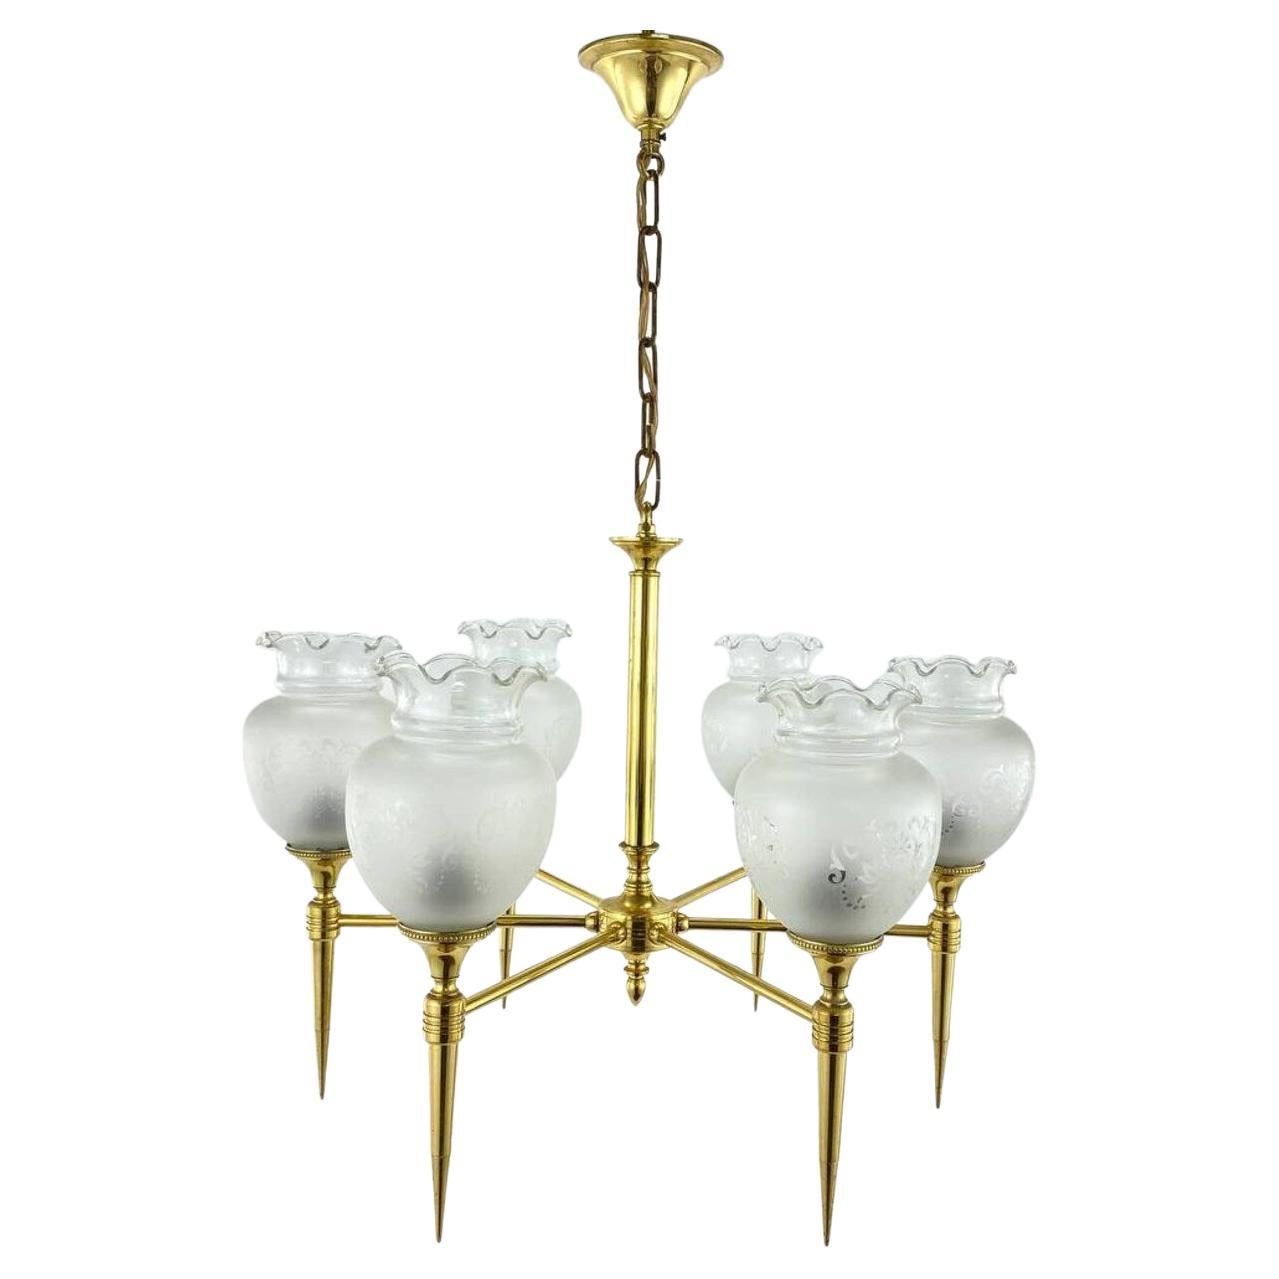 Vintage 6 Light Chandelier Brass and Frosted Glass Ceiling Lamp, France, 1970